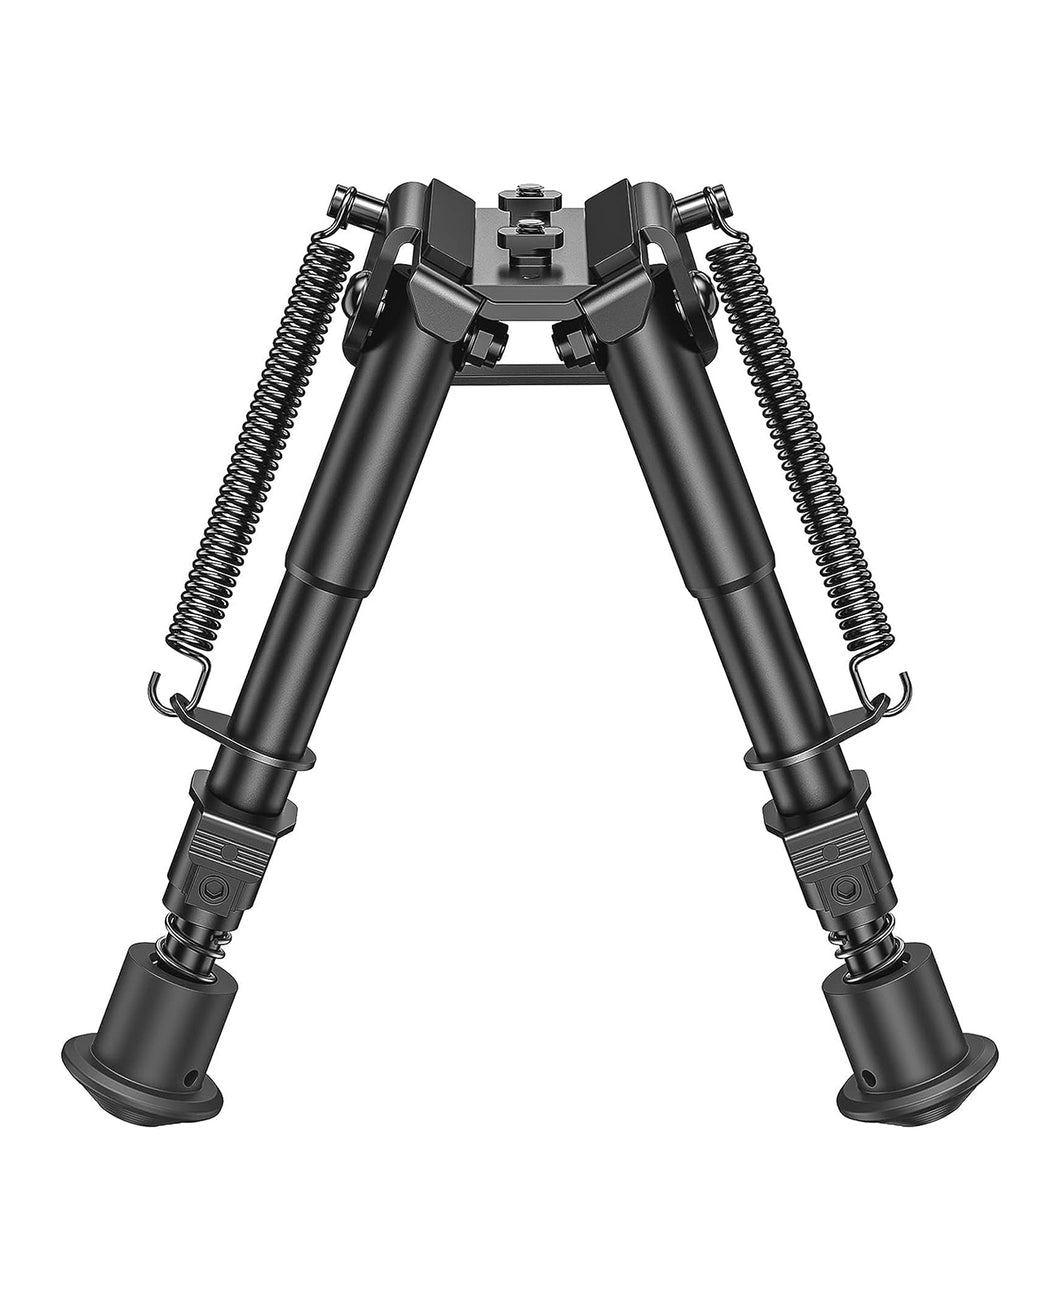 MidTen Bipod Compatible with Mlok Bipod 6-9 Inch Rifle Bipods for Hunting